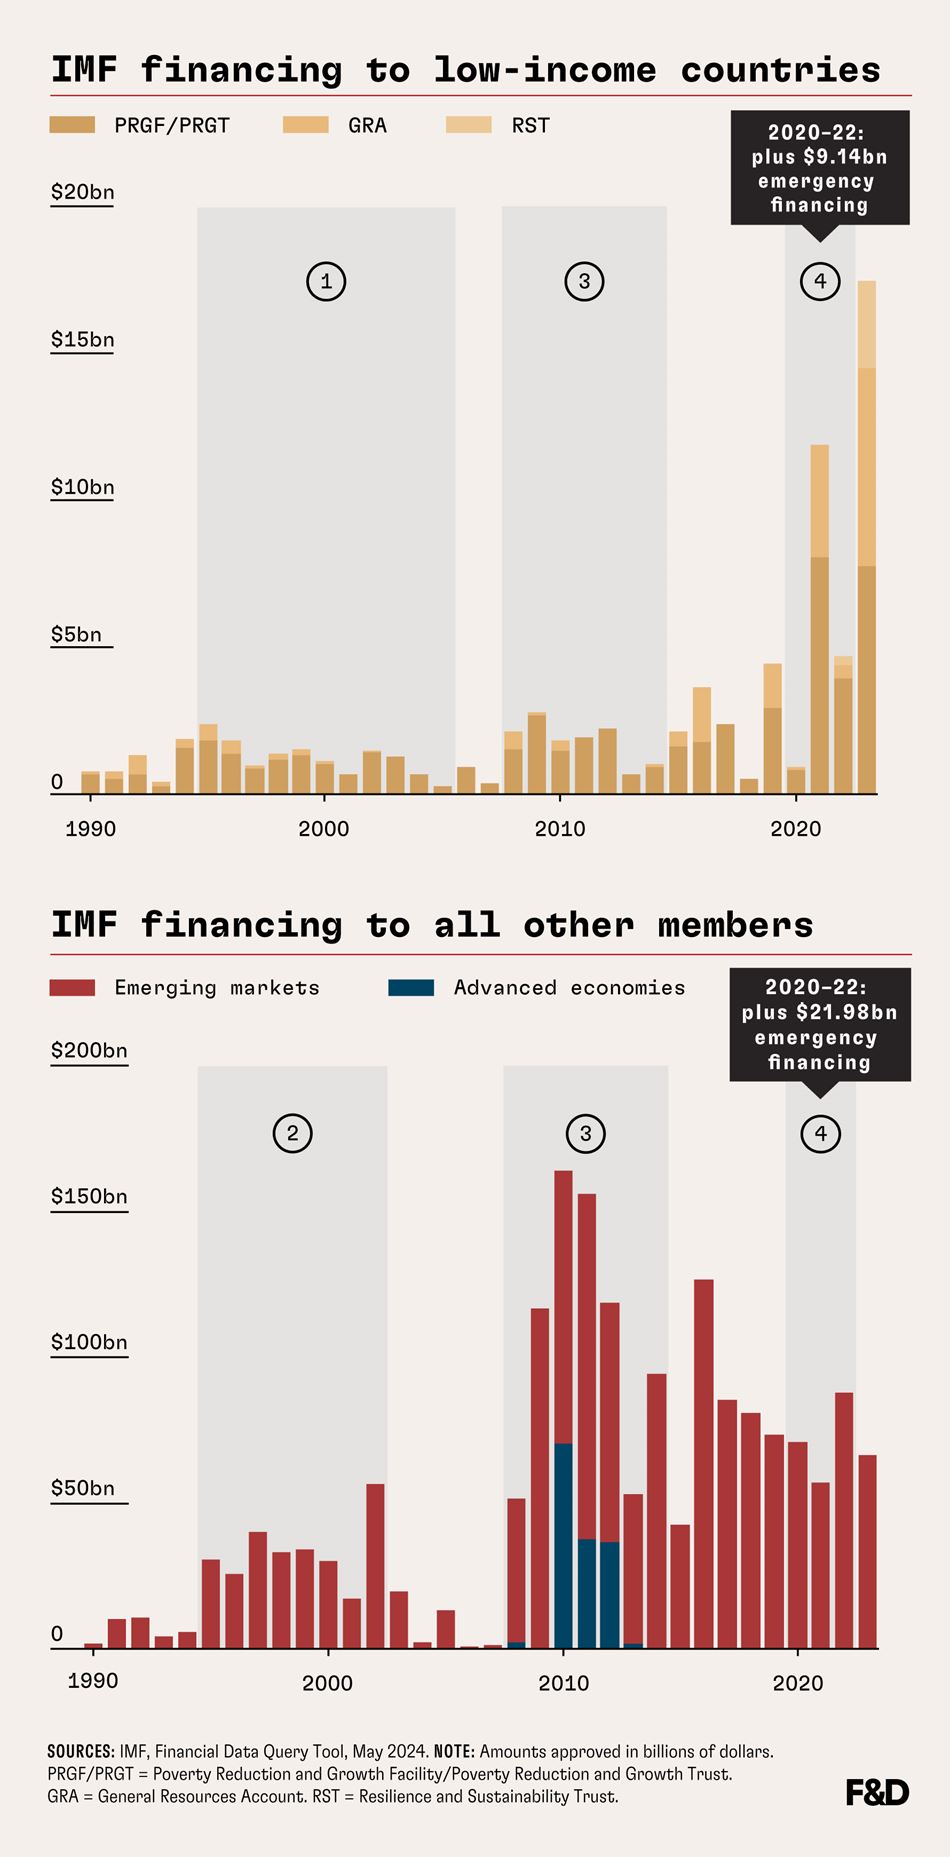 IMF financing to low-income countries